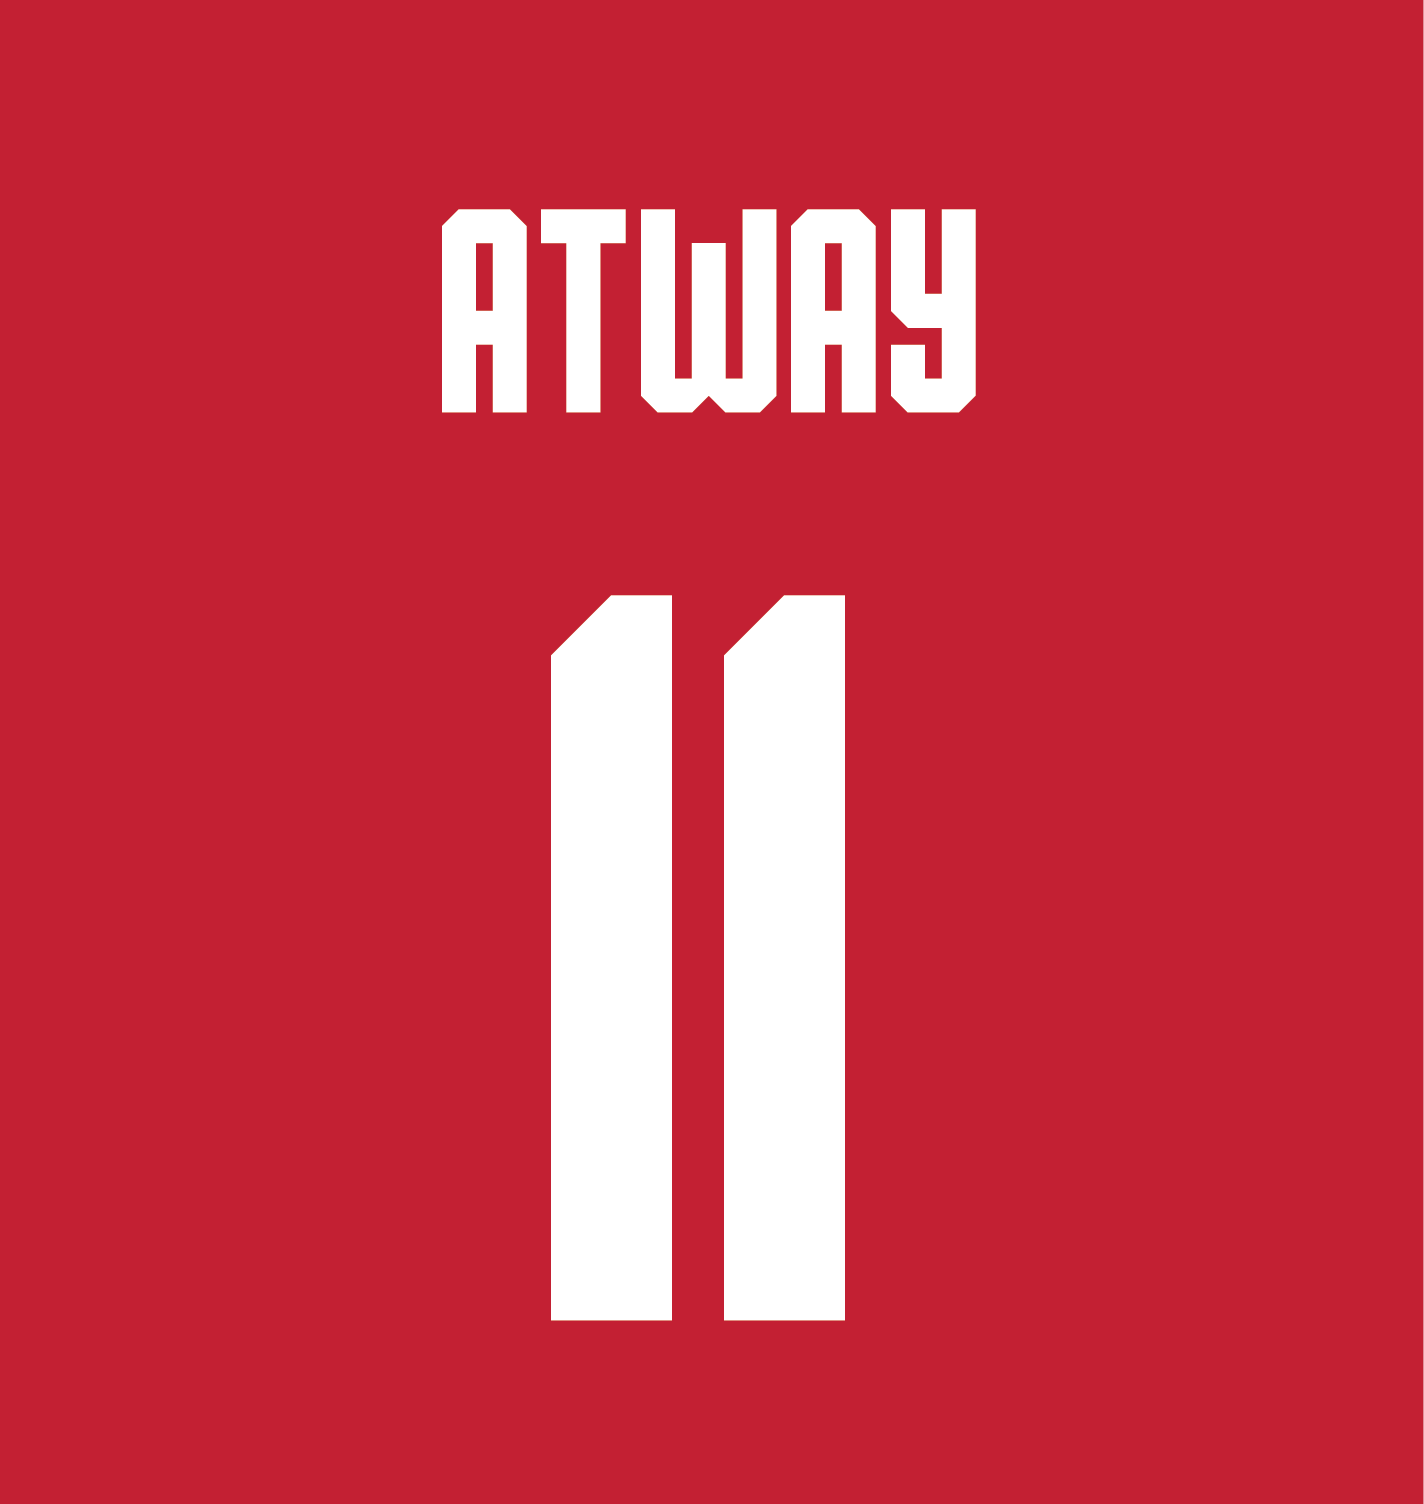 Madeline Atway | #11